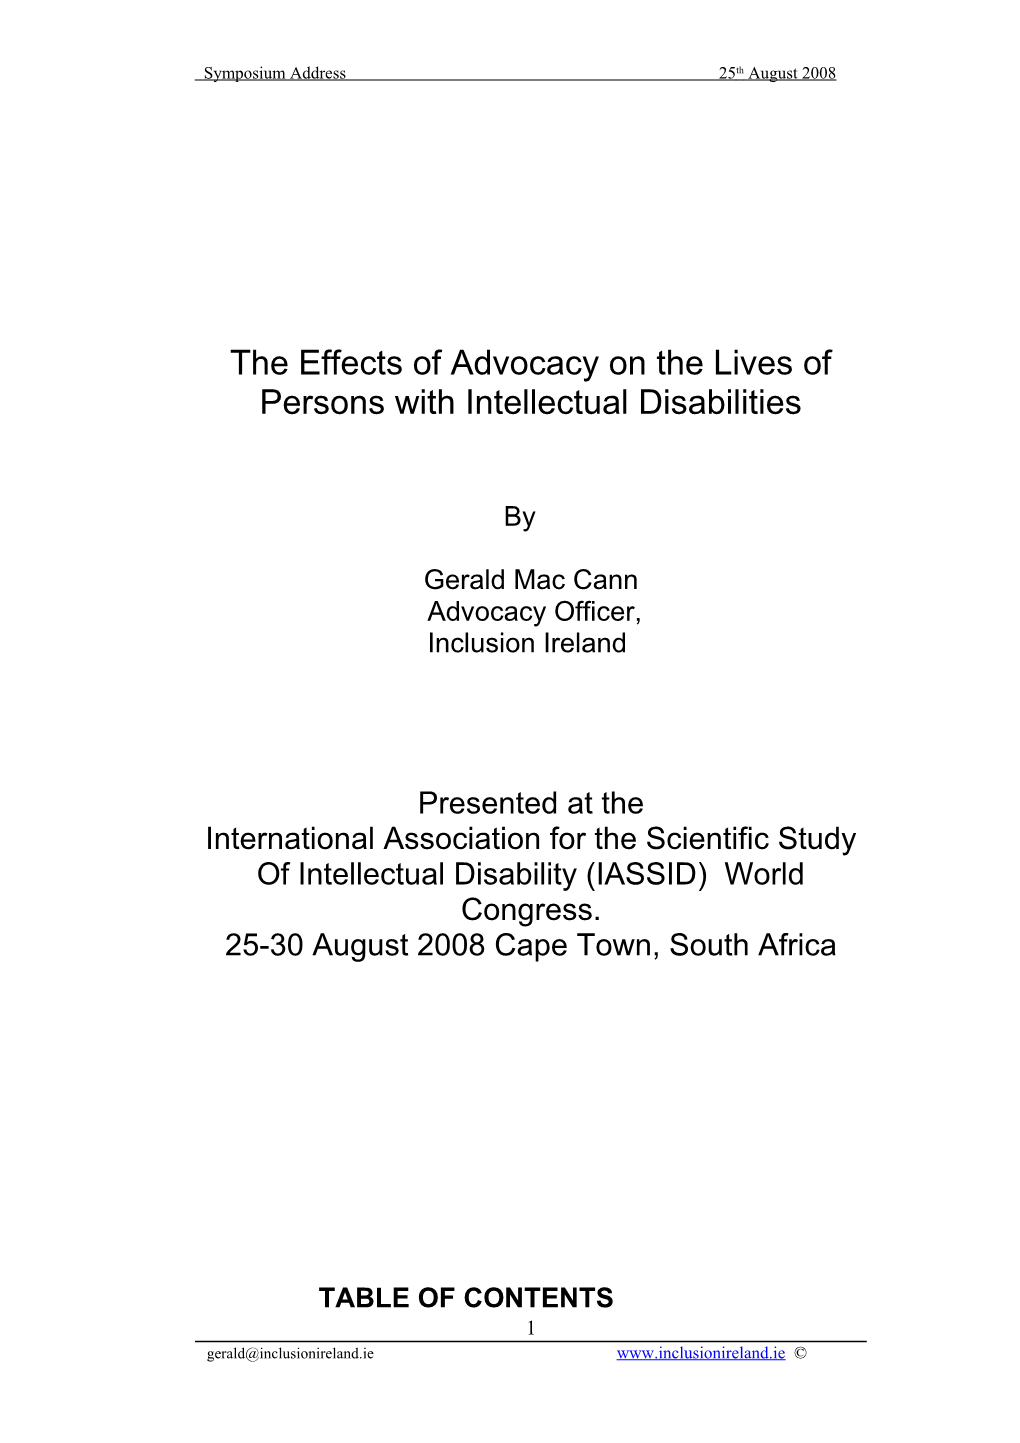 The Effects of Advocacy on Thelives of Persons with Intellectual Disabilities